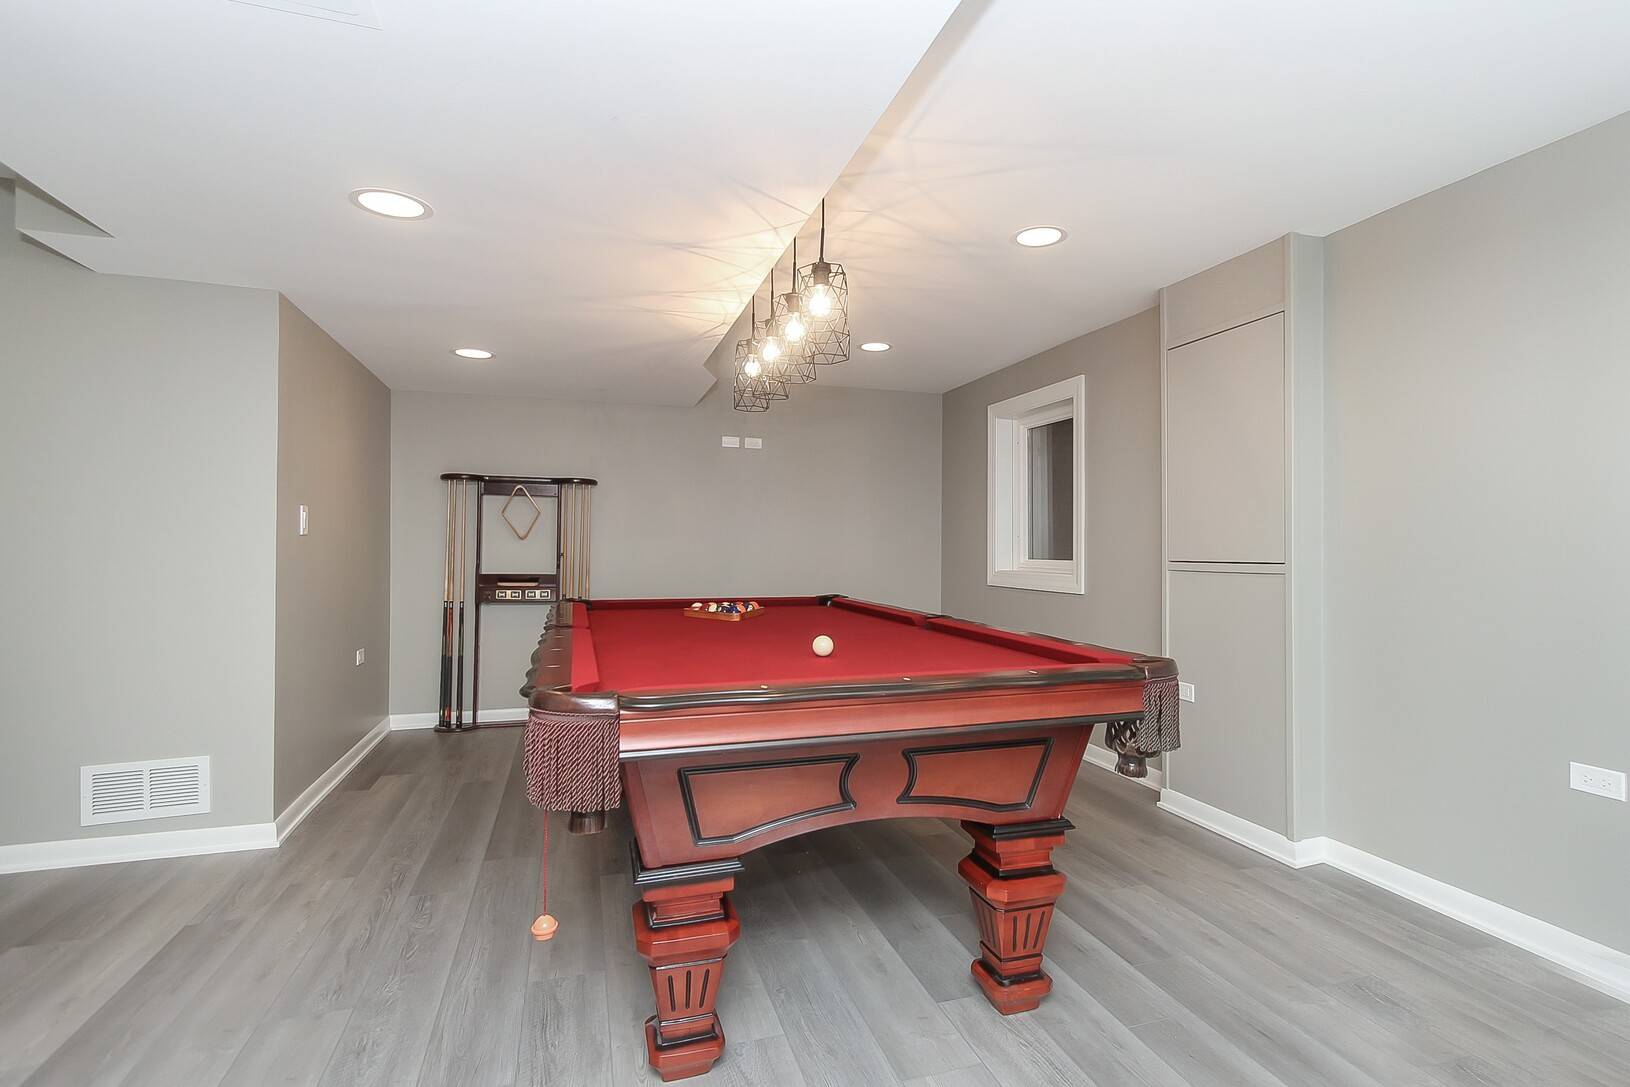 Gray Finished Basement With Red Billiards Table and Hanging Light Fixtures Above